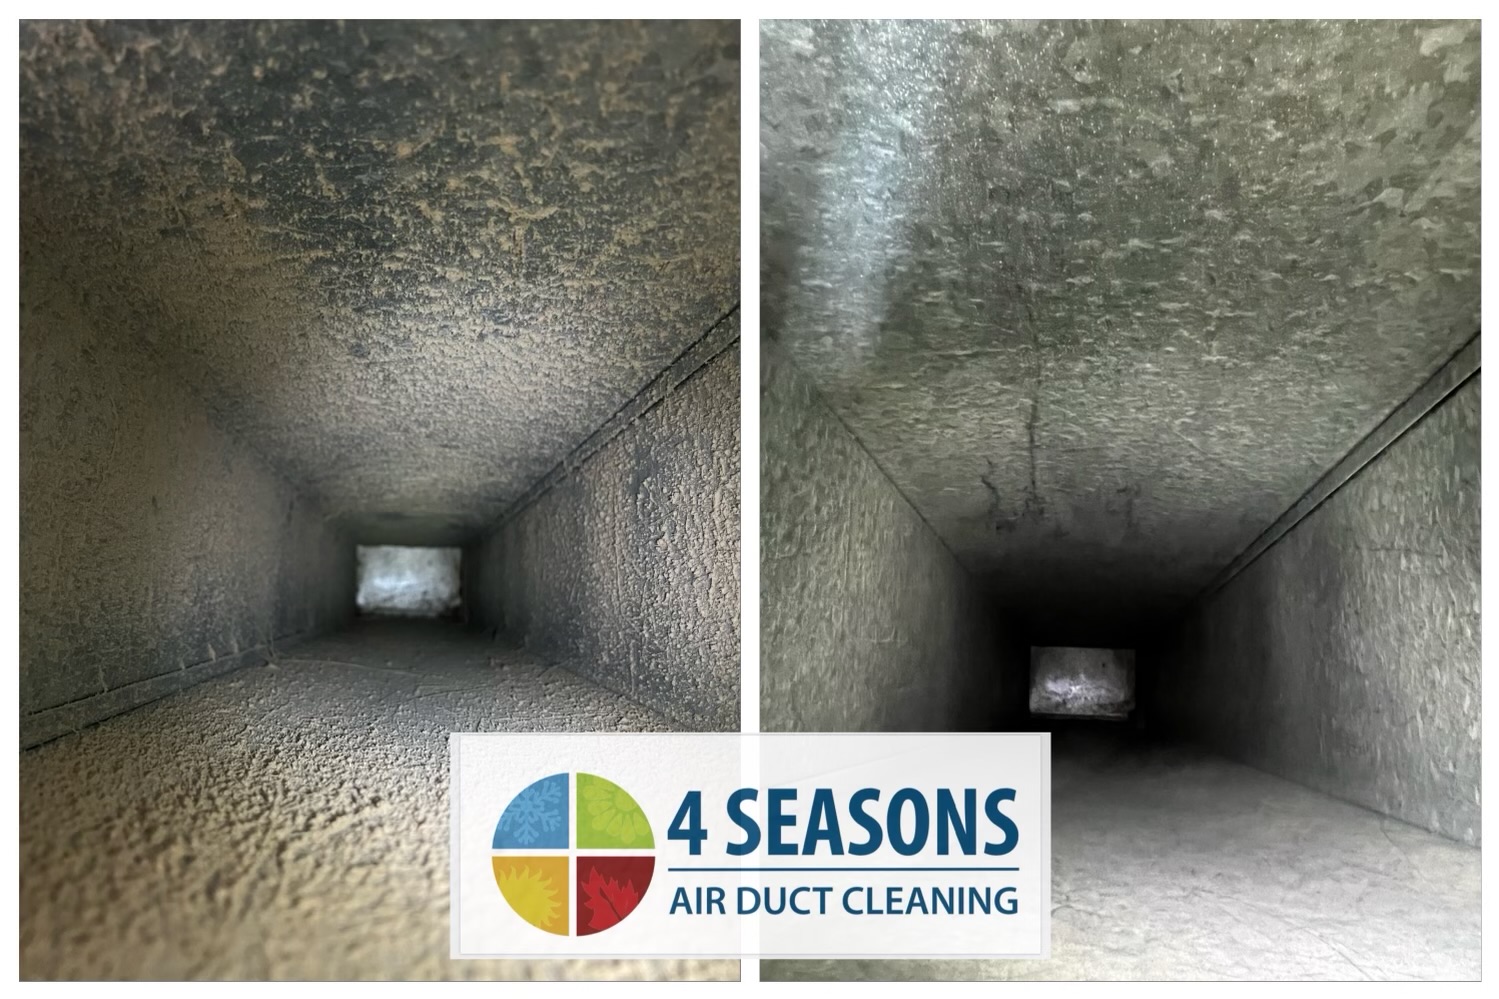 Before and After images of Air duct cleaning in Timonium